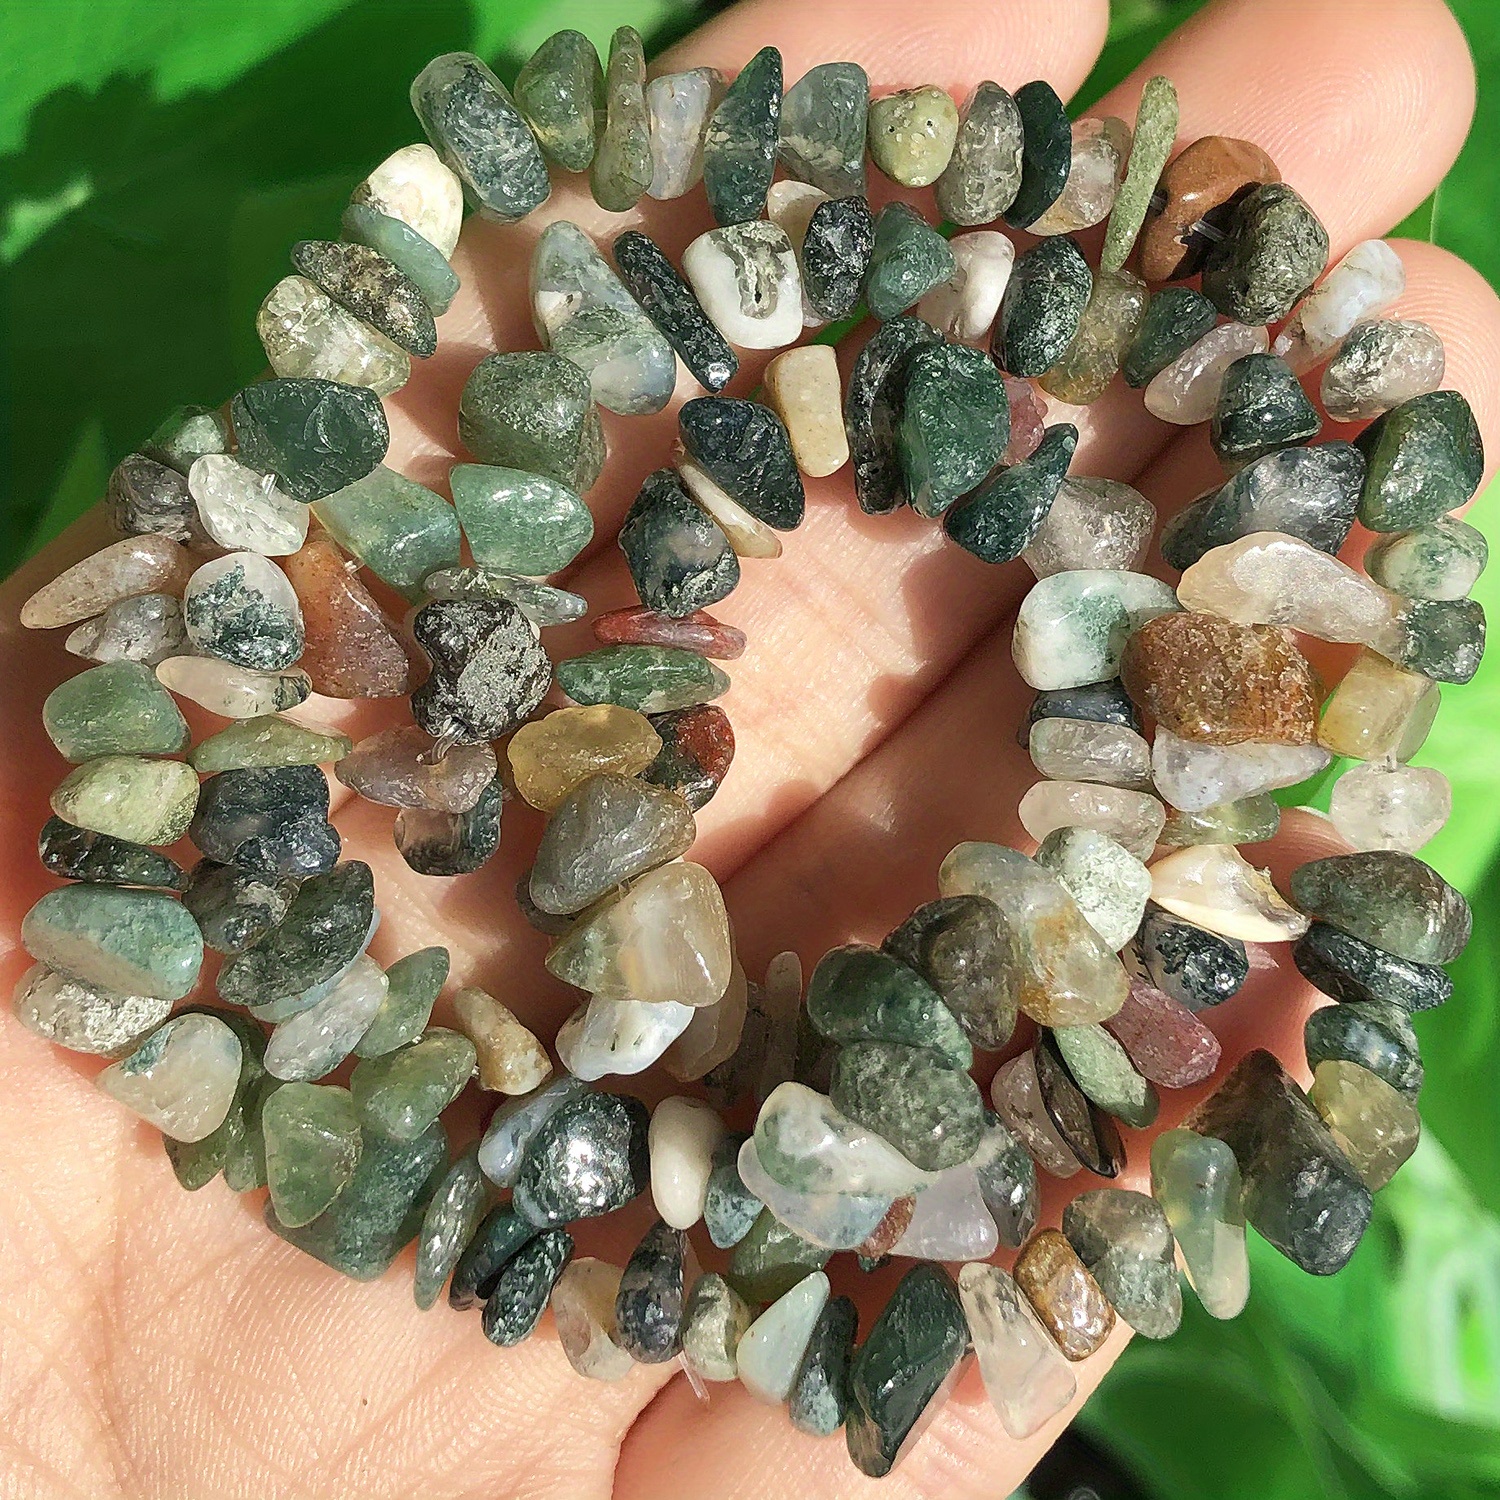  TUMBEELLUWA 40pcs Crystal Stone Large Hole Beads for Jewelry  Making Macrame Beads for Hair Braids(14mmx8mm), Opalite + Indian Agate +  Amethyst + Green Aventurine